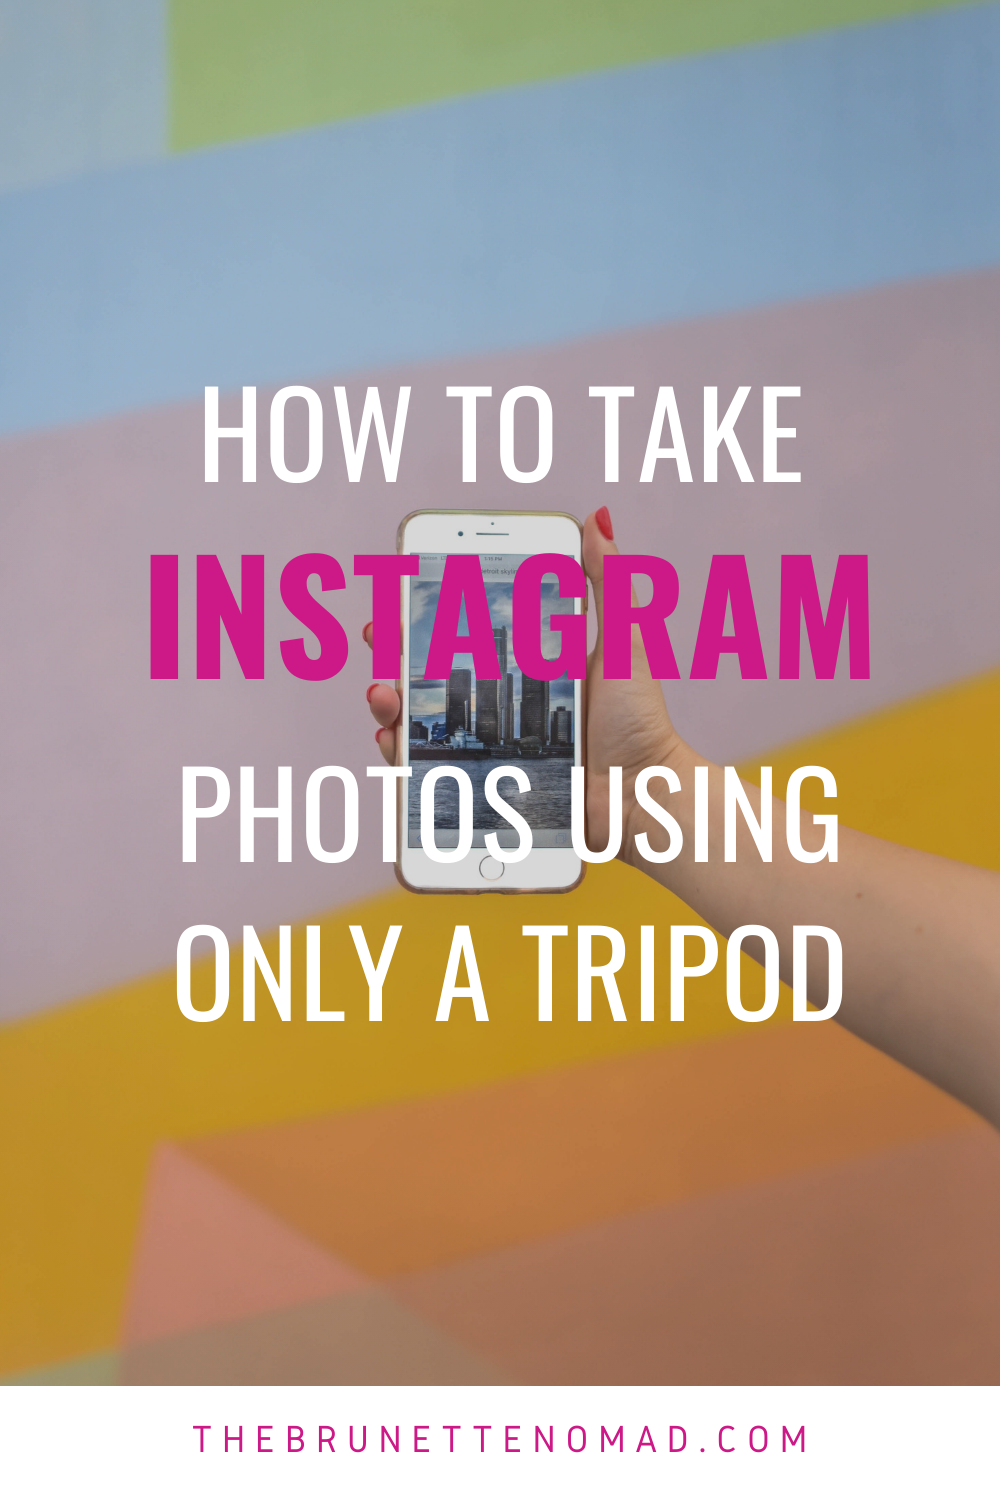 how to take quality instagram photos only using a tripod